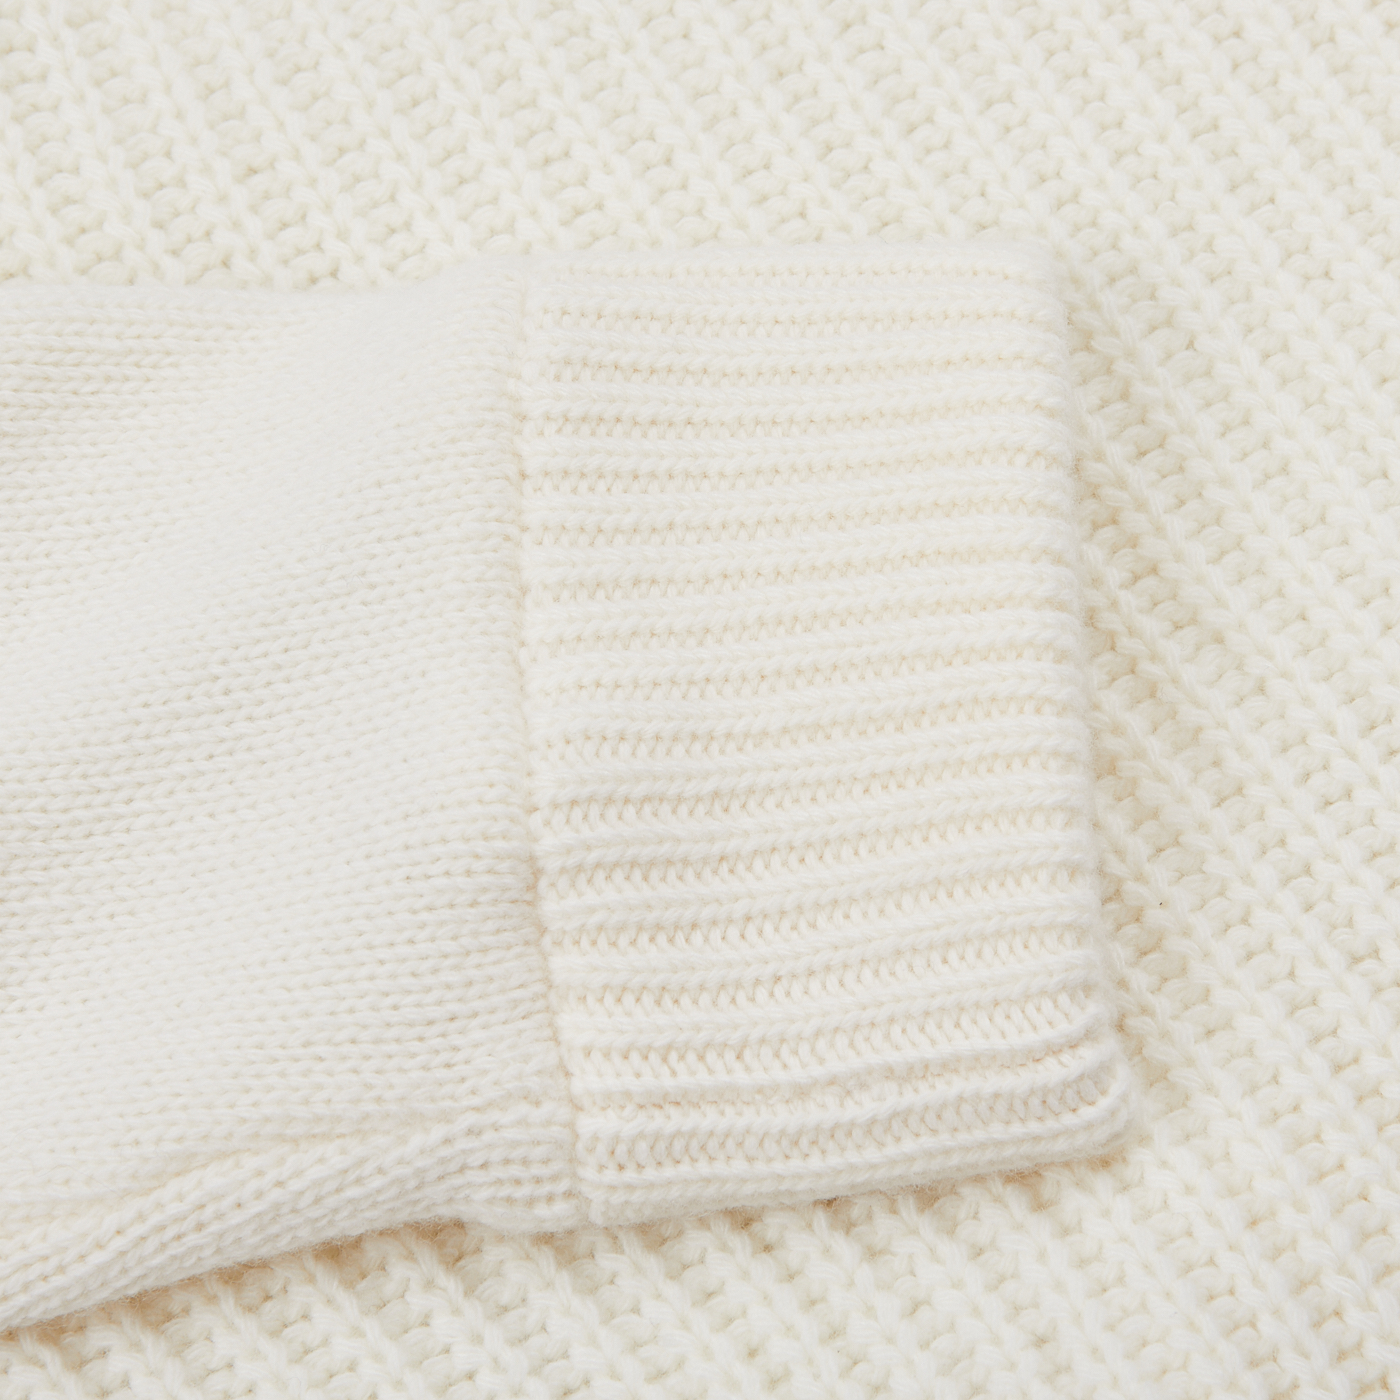 Close-up of the cuff of a Herno Cream Wool Nylon Reversible Knitted Jacket on top of another layer of similar virgin wool knit fabric. The textures and stitching patterns of the two knitted fabrics are visible.